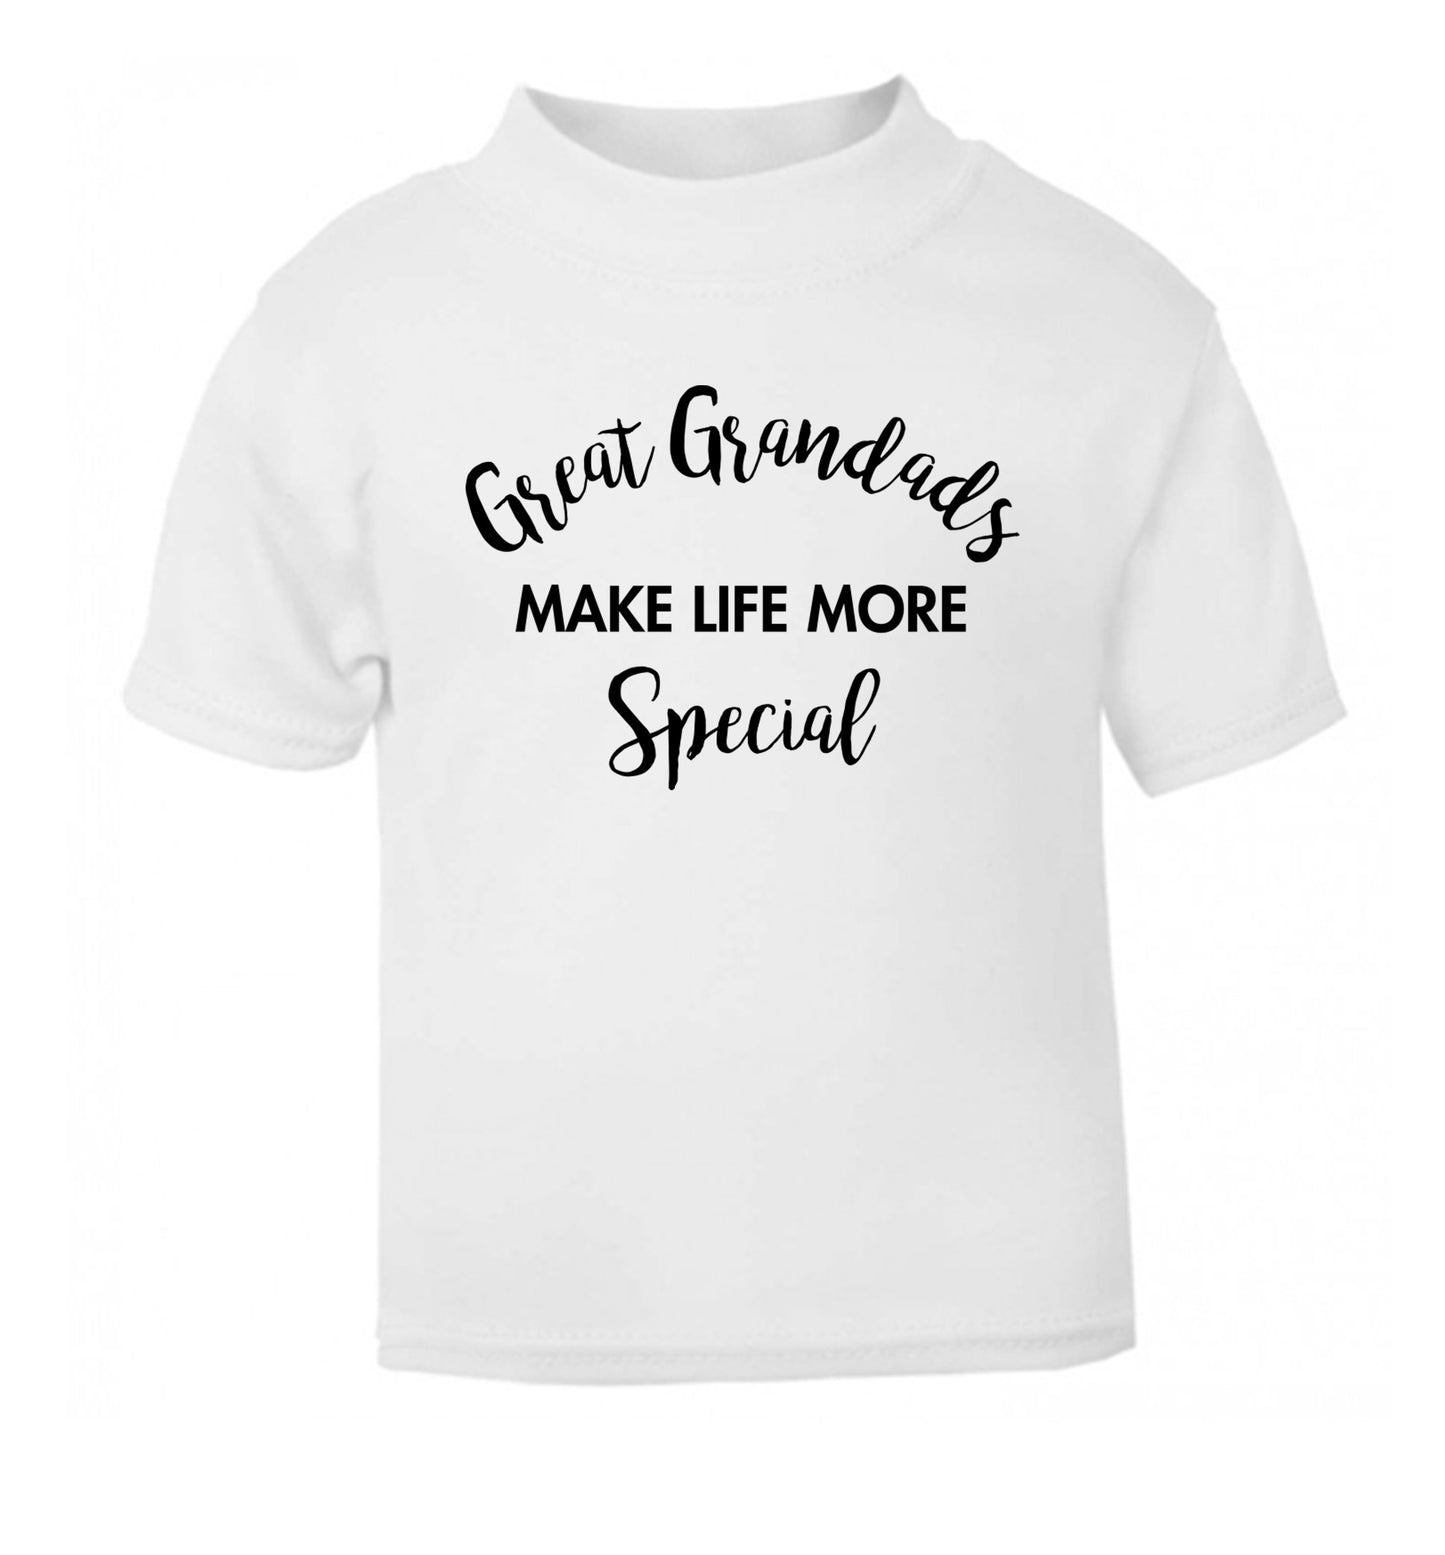 Great Grandads make life more special white Baby Toddler Tshirt 2 Years